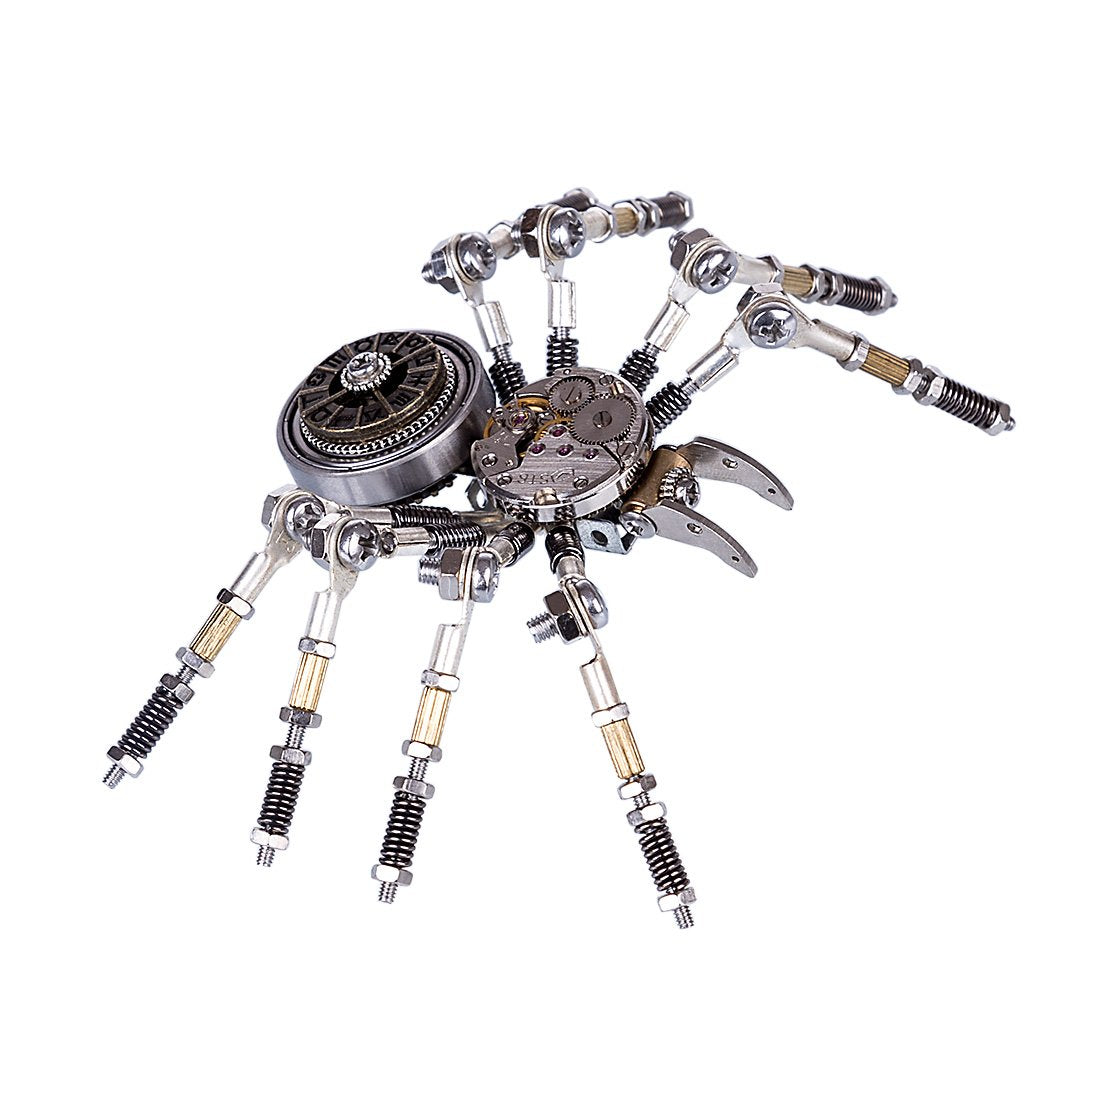 DIY Assemby Metal 3D Spider Model Kit Home Office Decor Gift